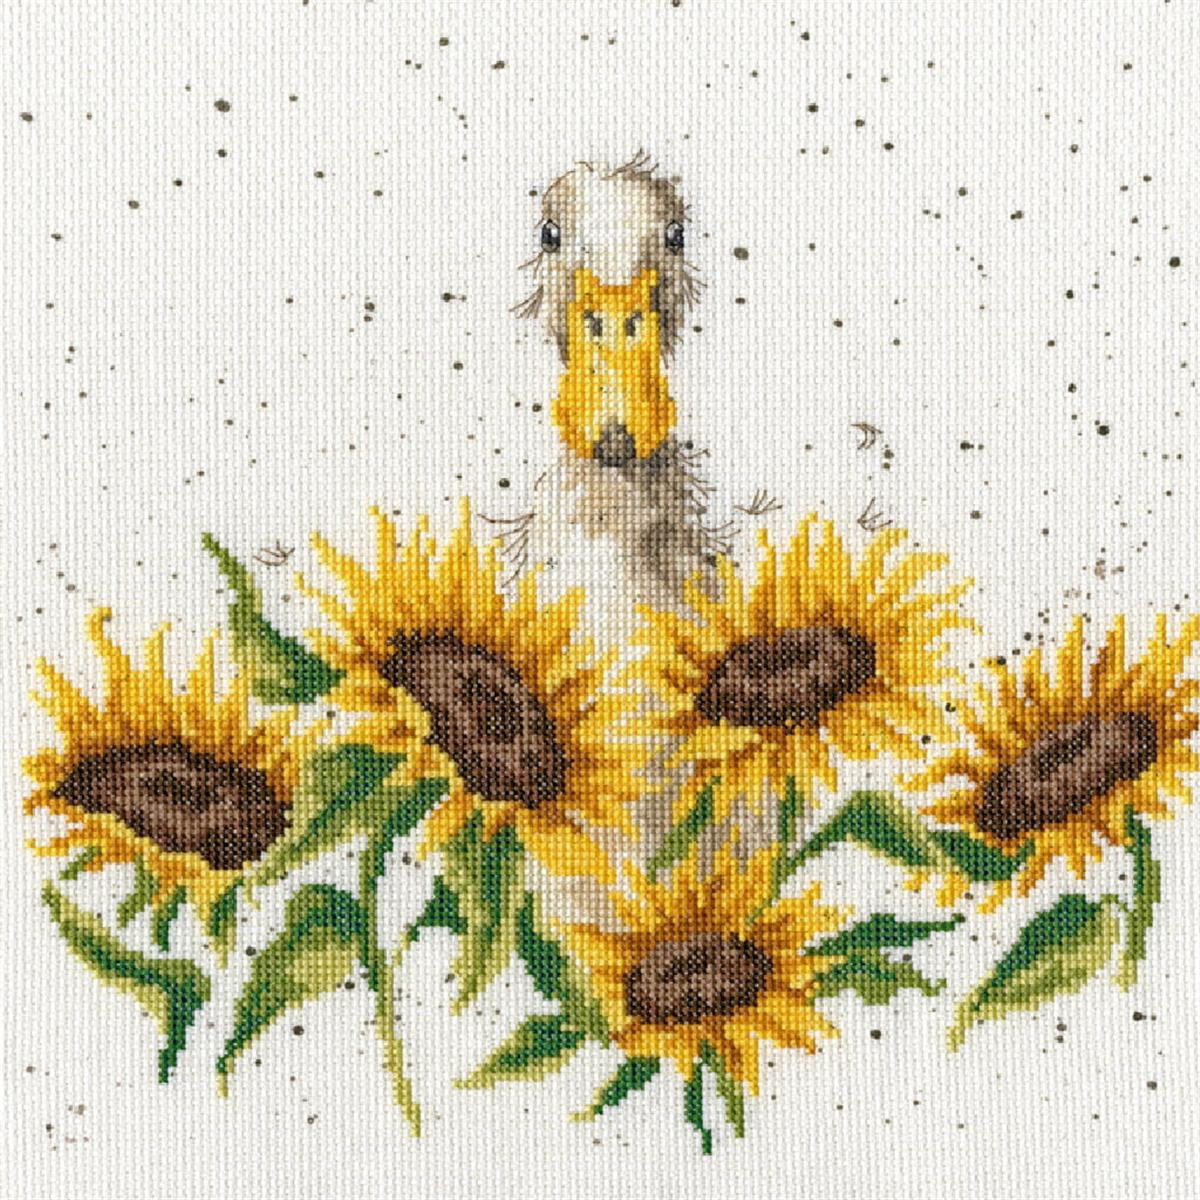 This embroidery pack design from Bothy Threads features a...